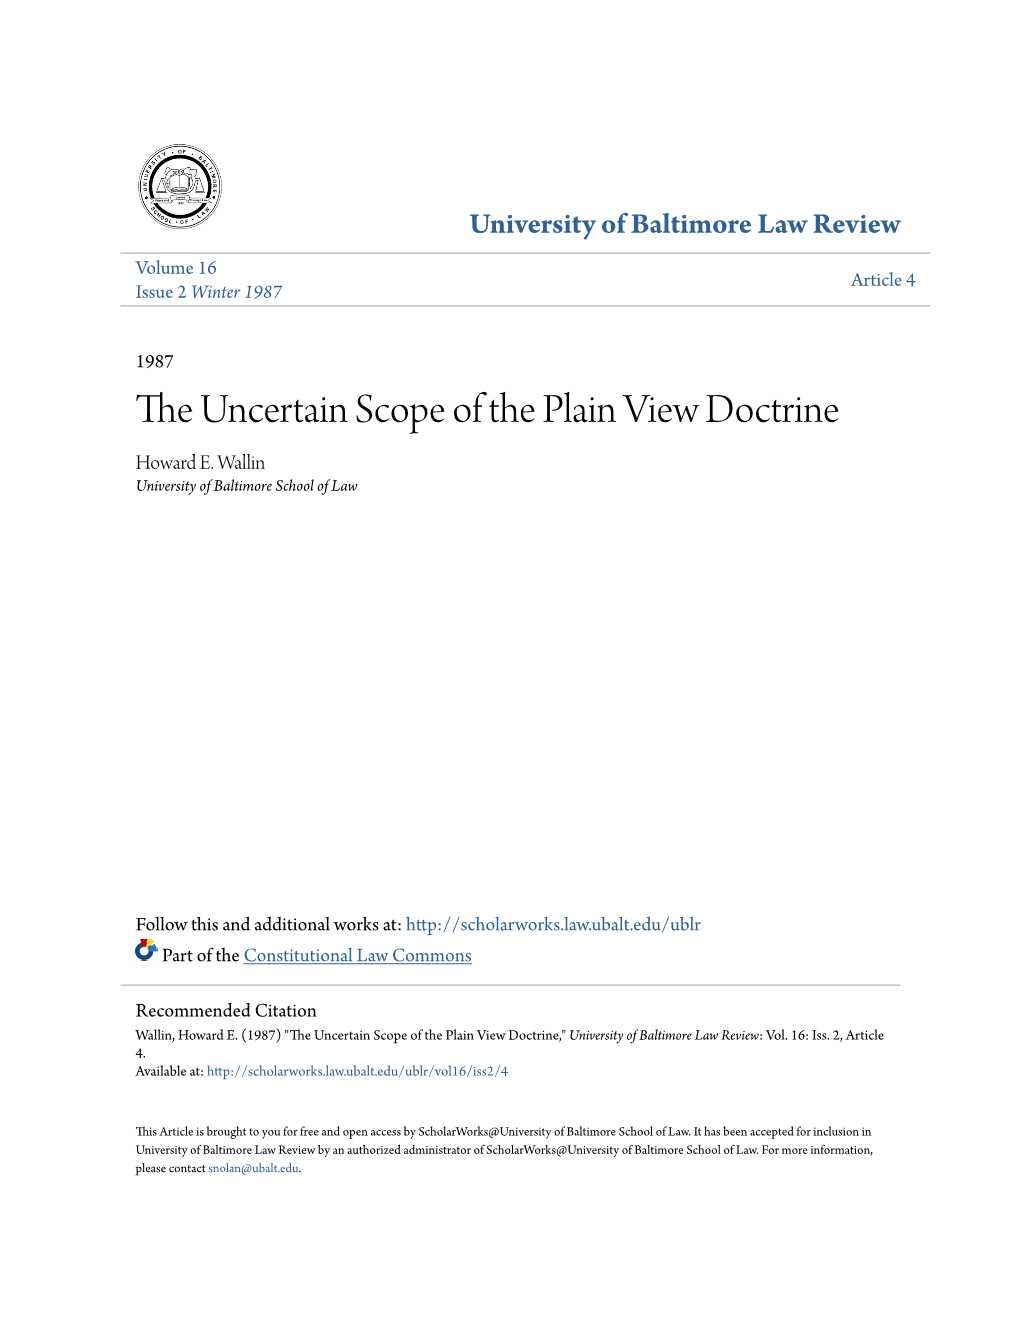 The Uncertain Scope of the Plain View Doctrine